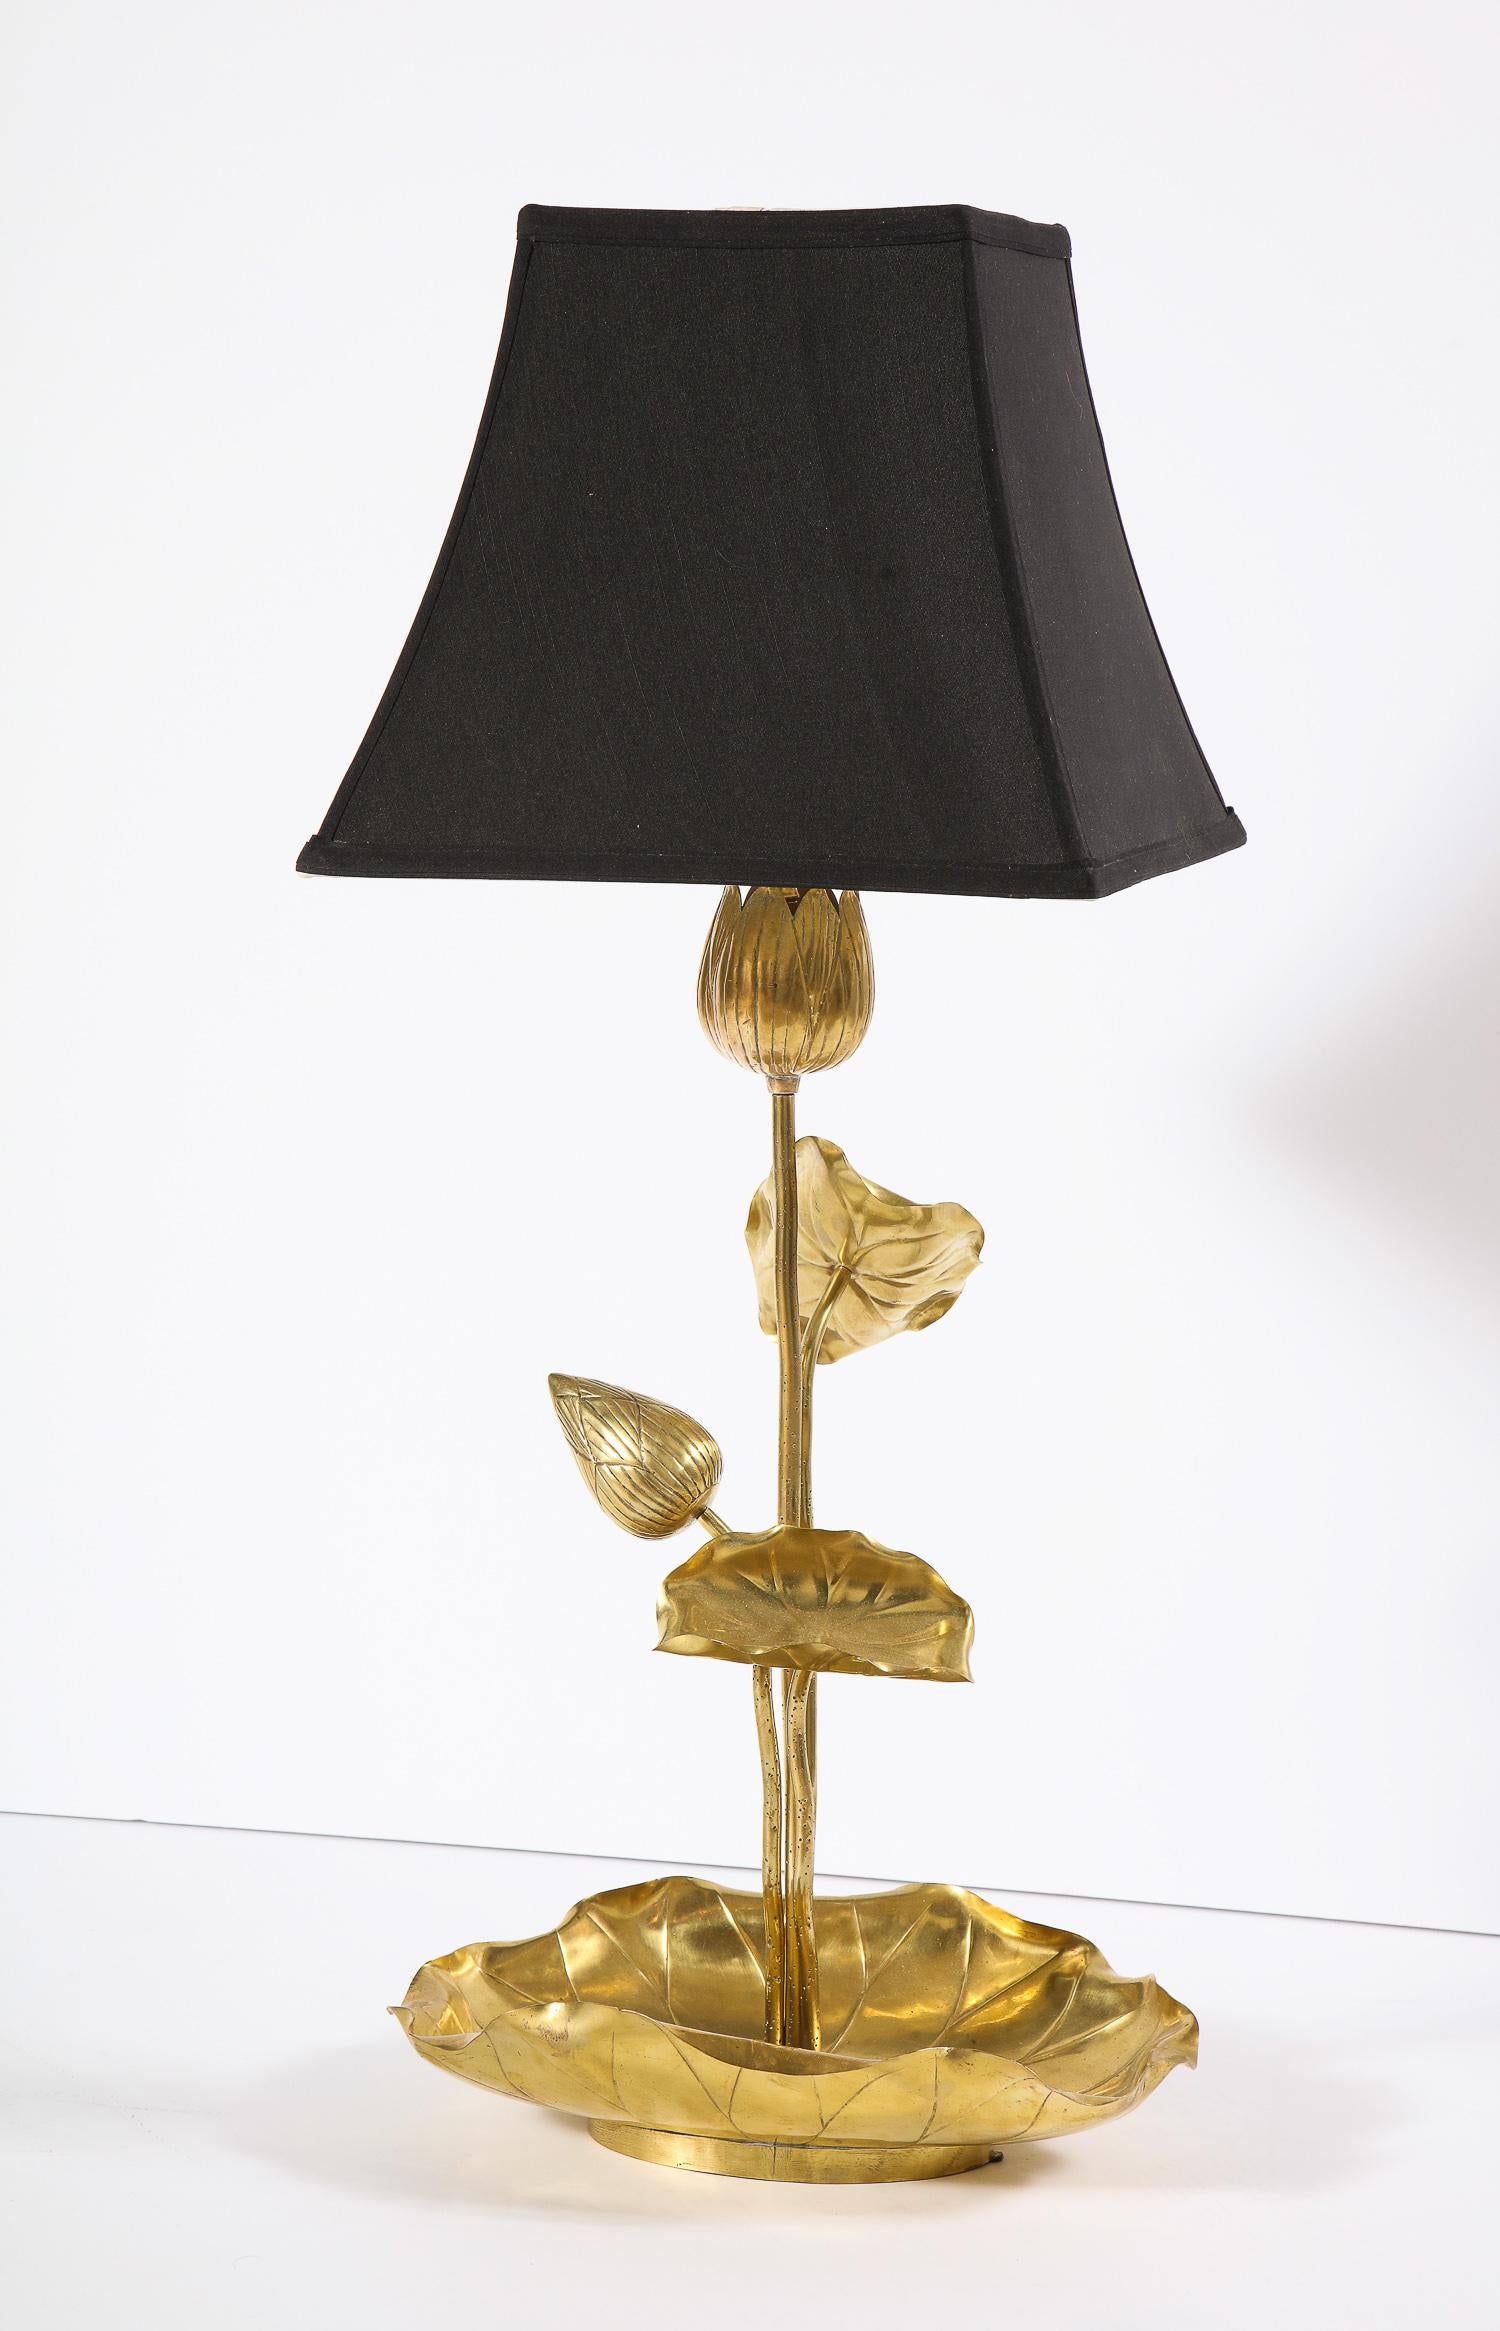 Decorative brass water lily table lamp, Italy, circa 1950.